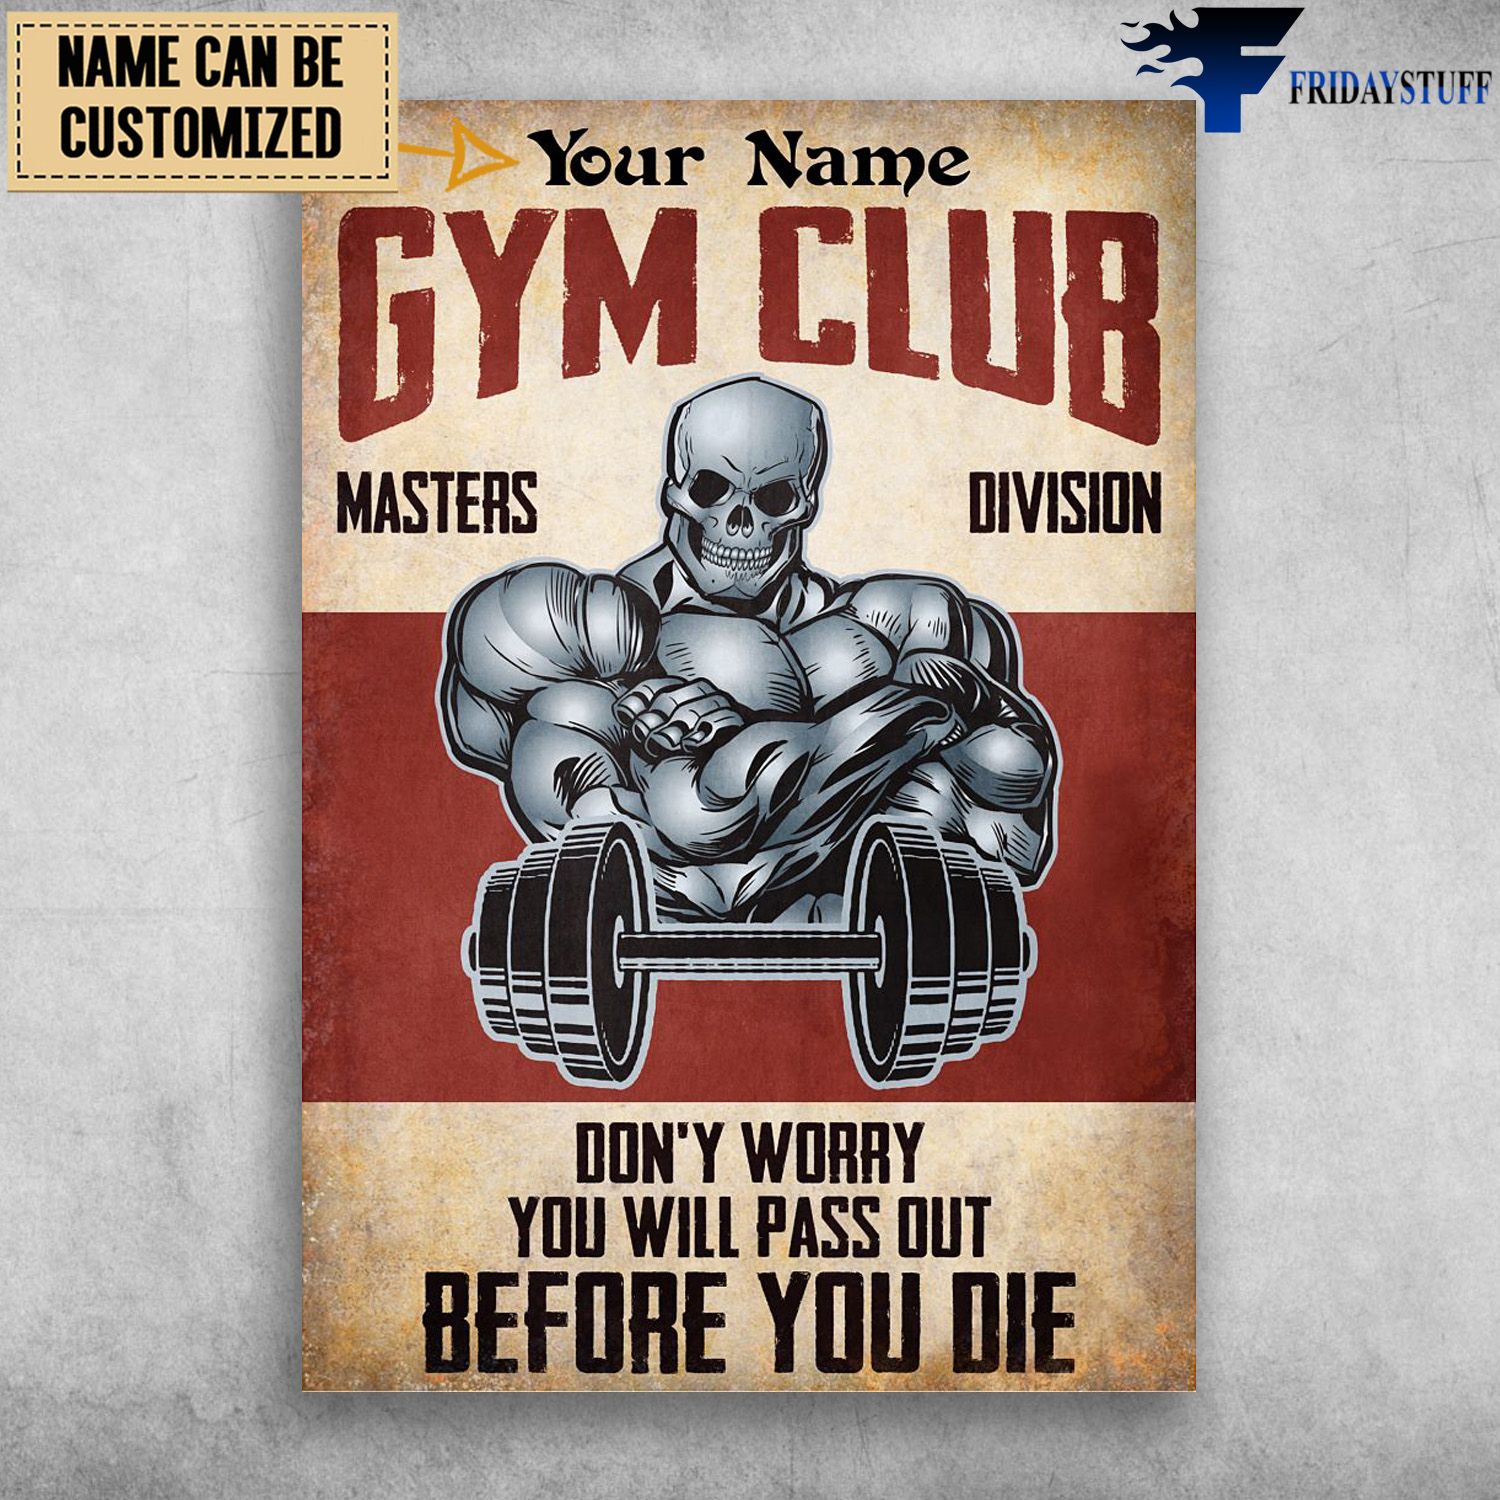 Skeleton Gym, Gym Club, Masters Division, Don't Worry, You Will Pass Out, Before You Die